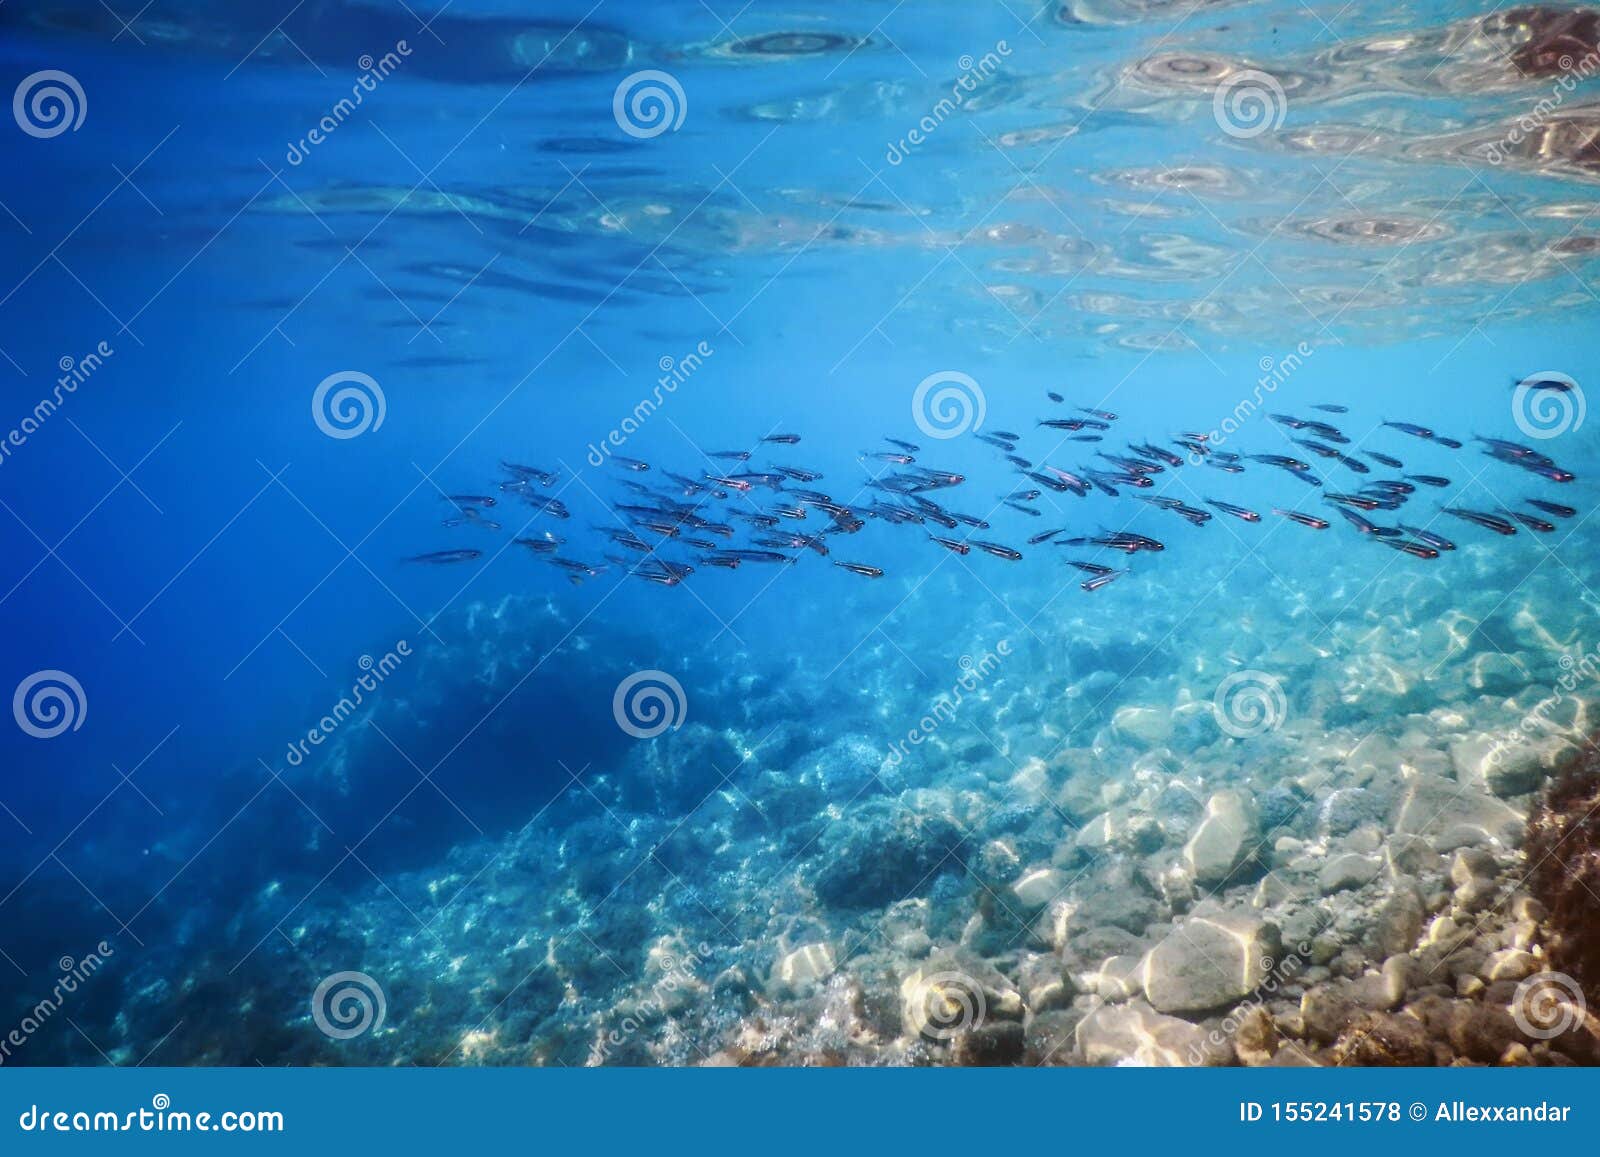 School of Silver Fish in Shallow Water, Underwater Stock Photo - Image ...